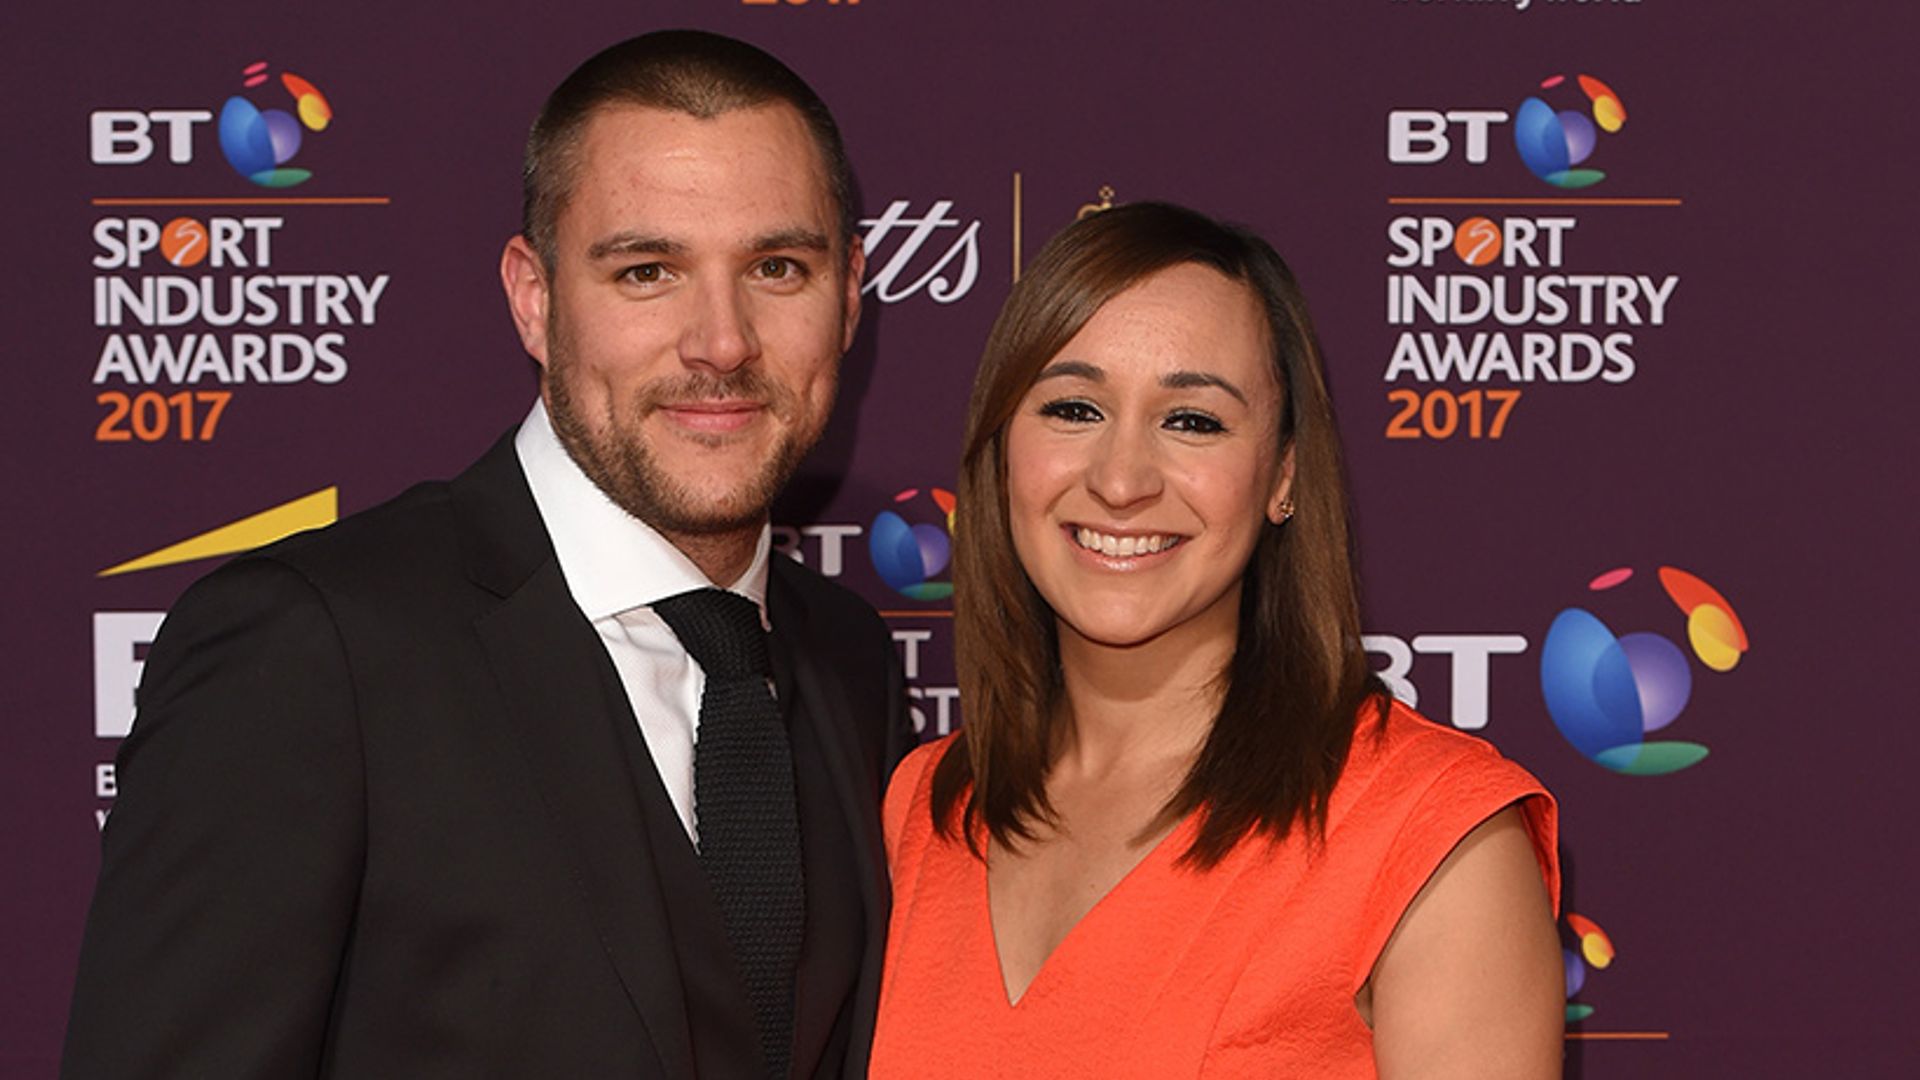 jessica-ennis-andy-hill